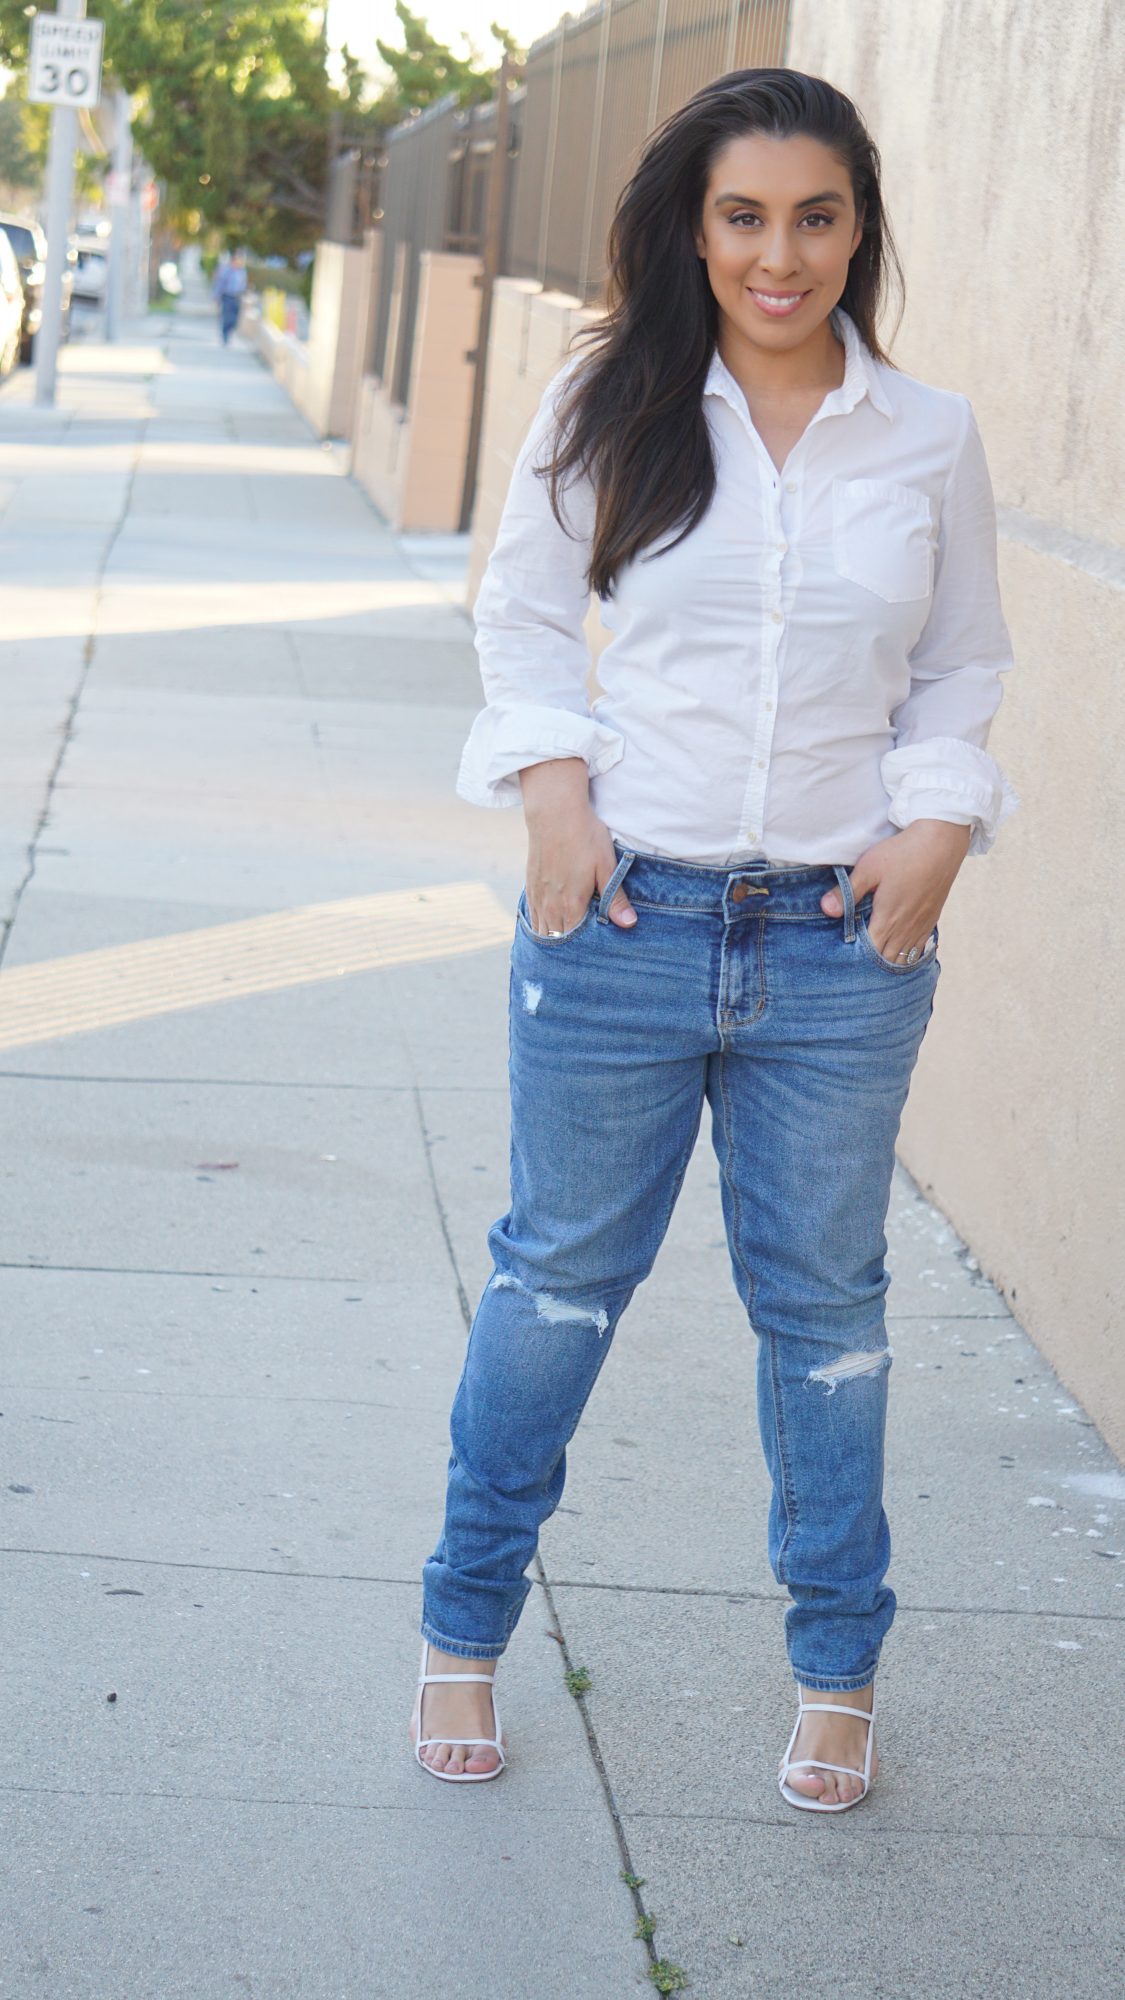 low-rise-jeans-button-up-blouse.jpg